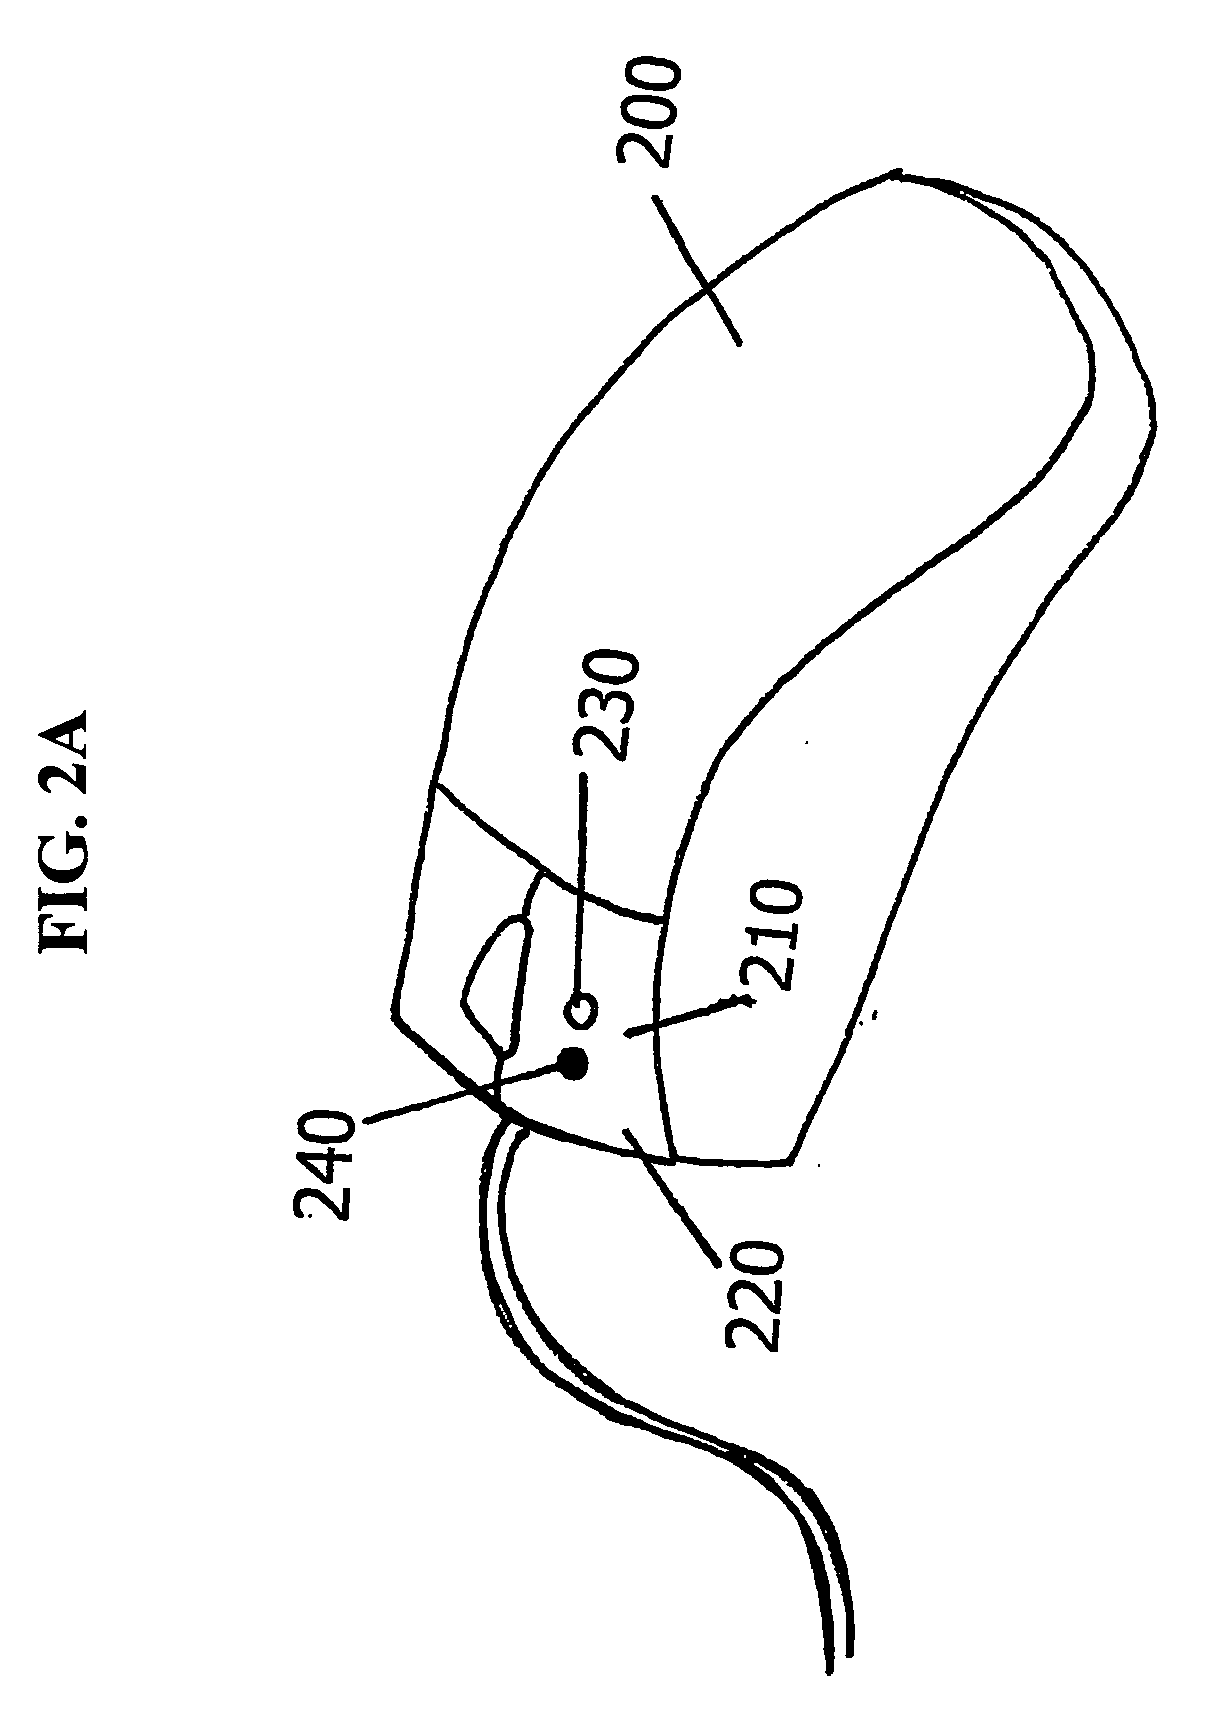 Physiological monitoring system for a computational device of a human subject